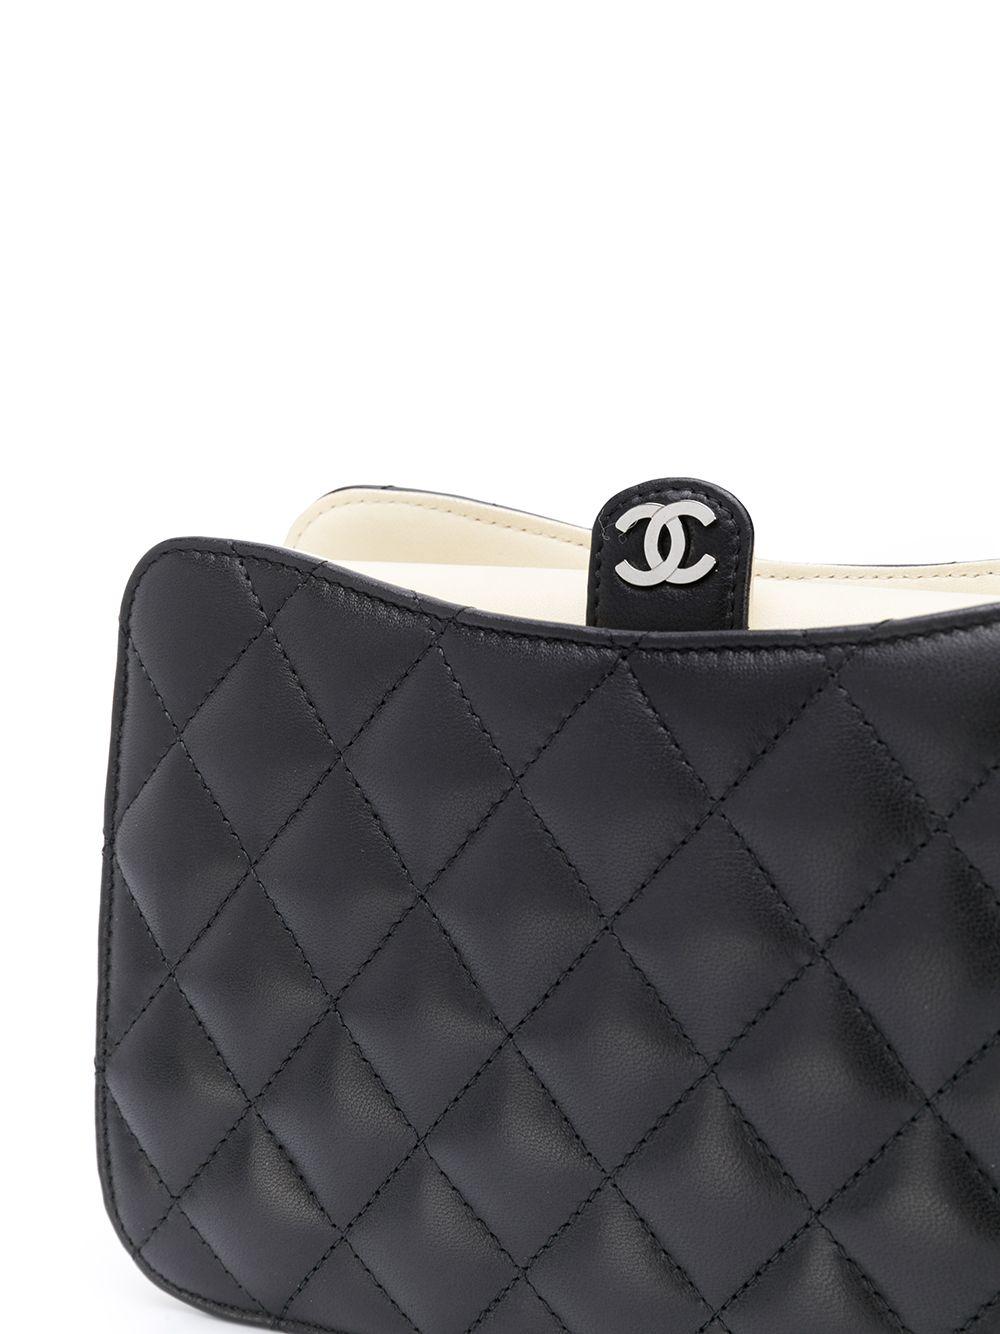 Chanel Quilted Lambskin Shoulder Bag In Excellent Condition In London, GB